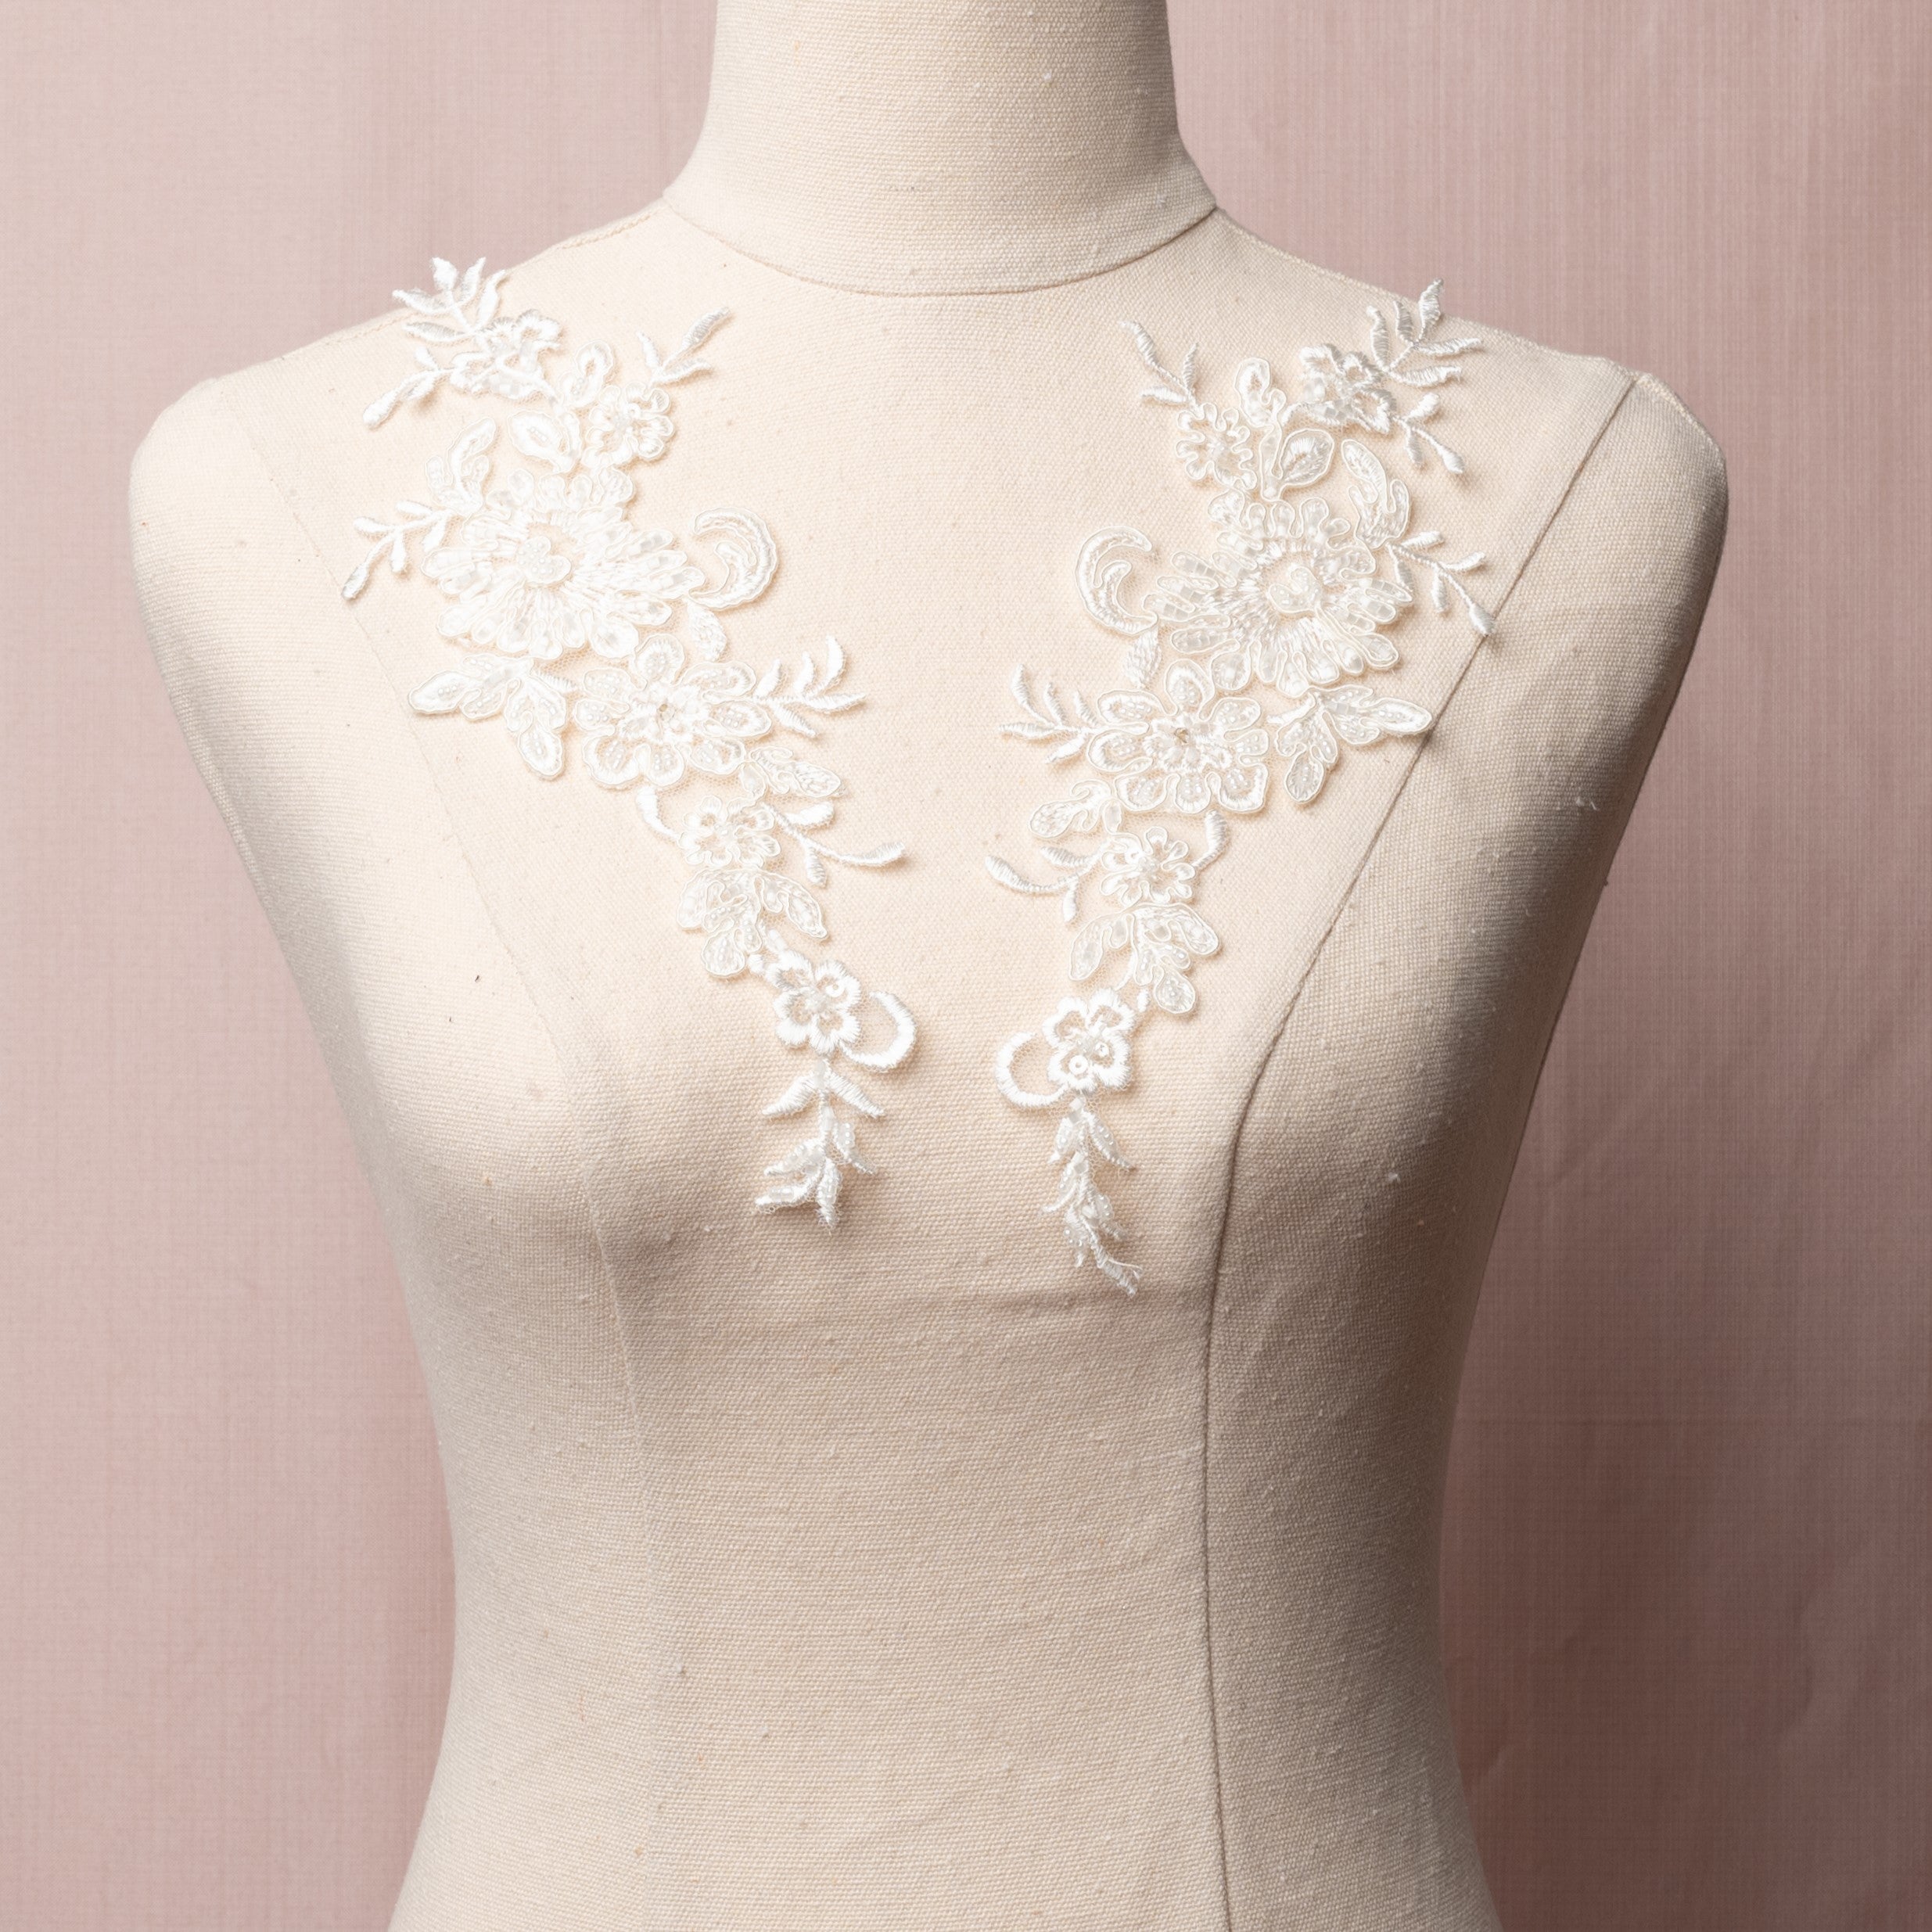 Cream beaded lace applique pair with a floral design displayed on a mannequin.